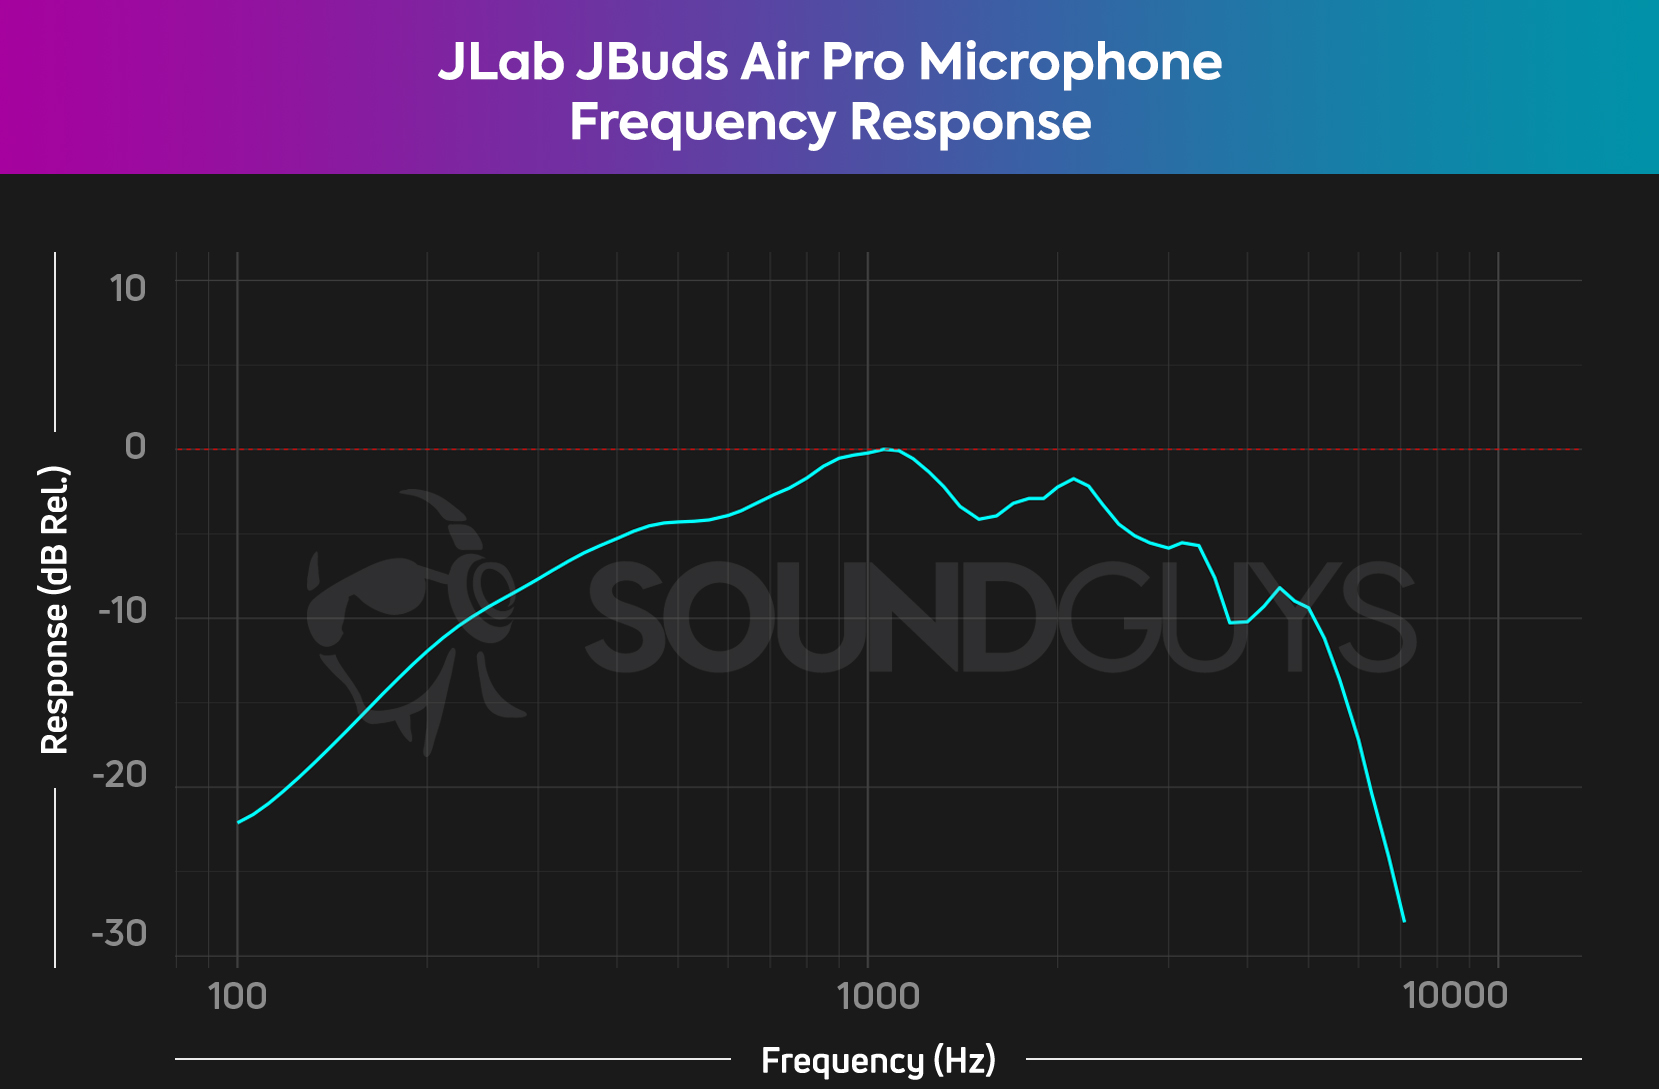 The microphone frequency response chart for the JLab JBuds Air Pro